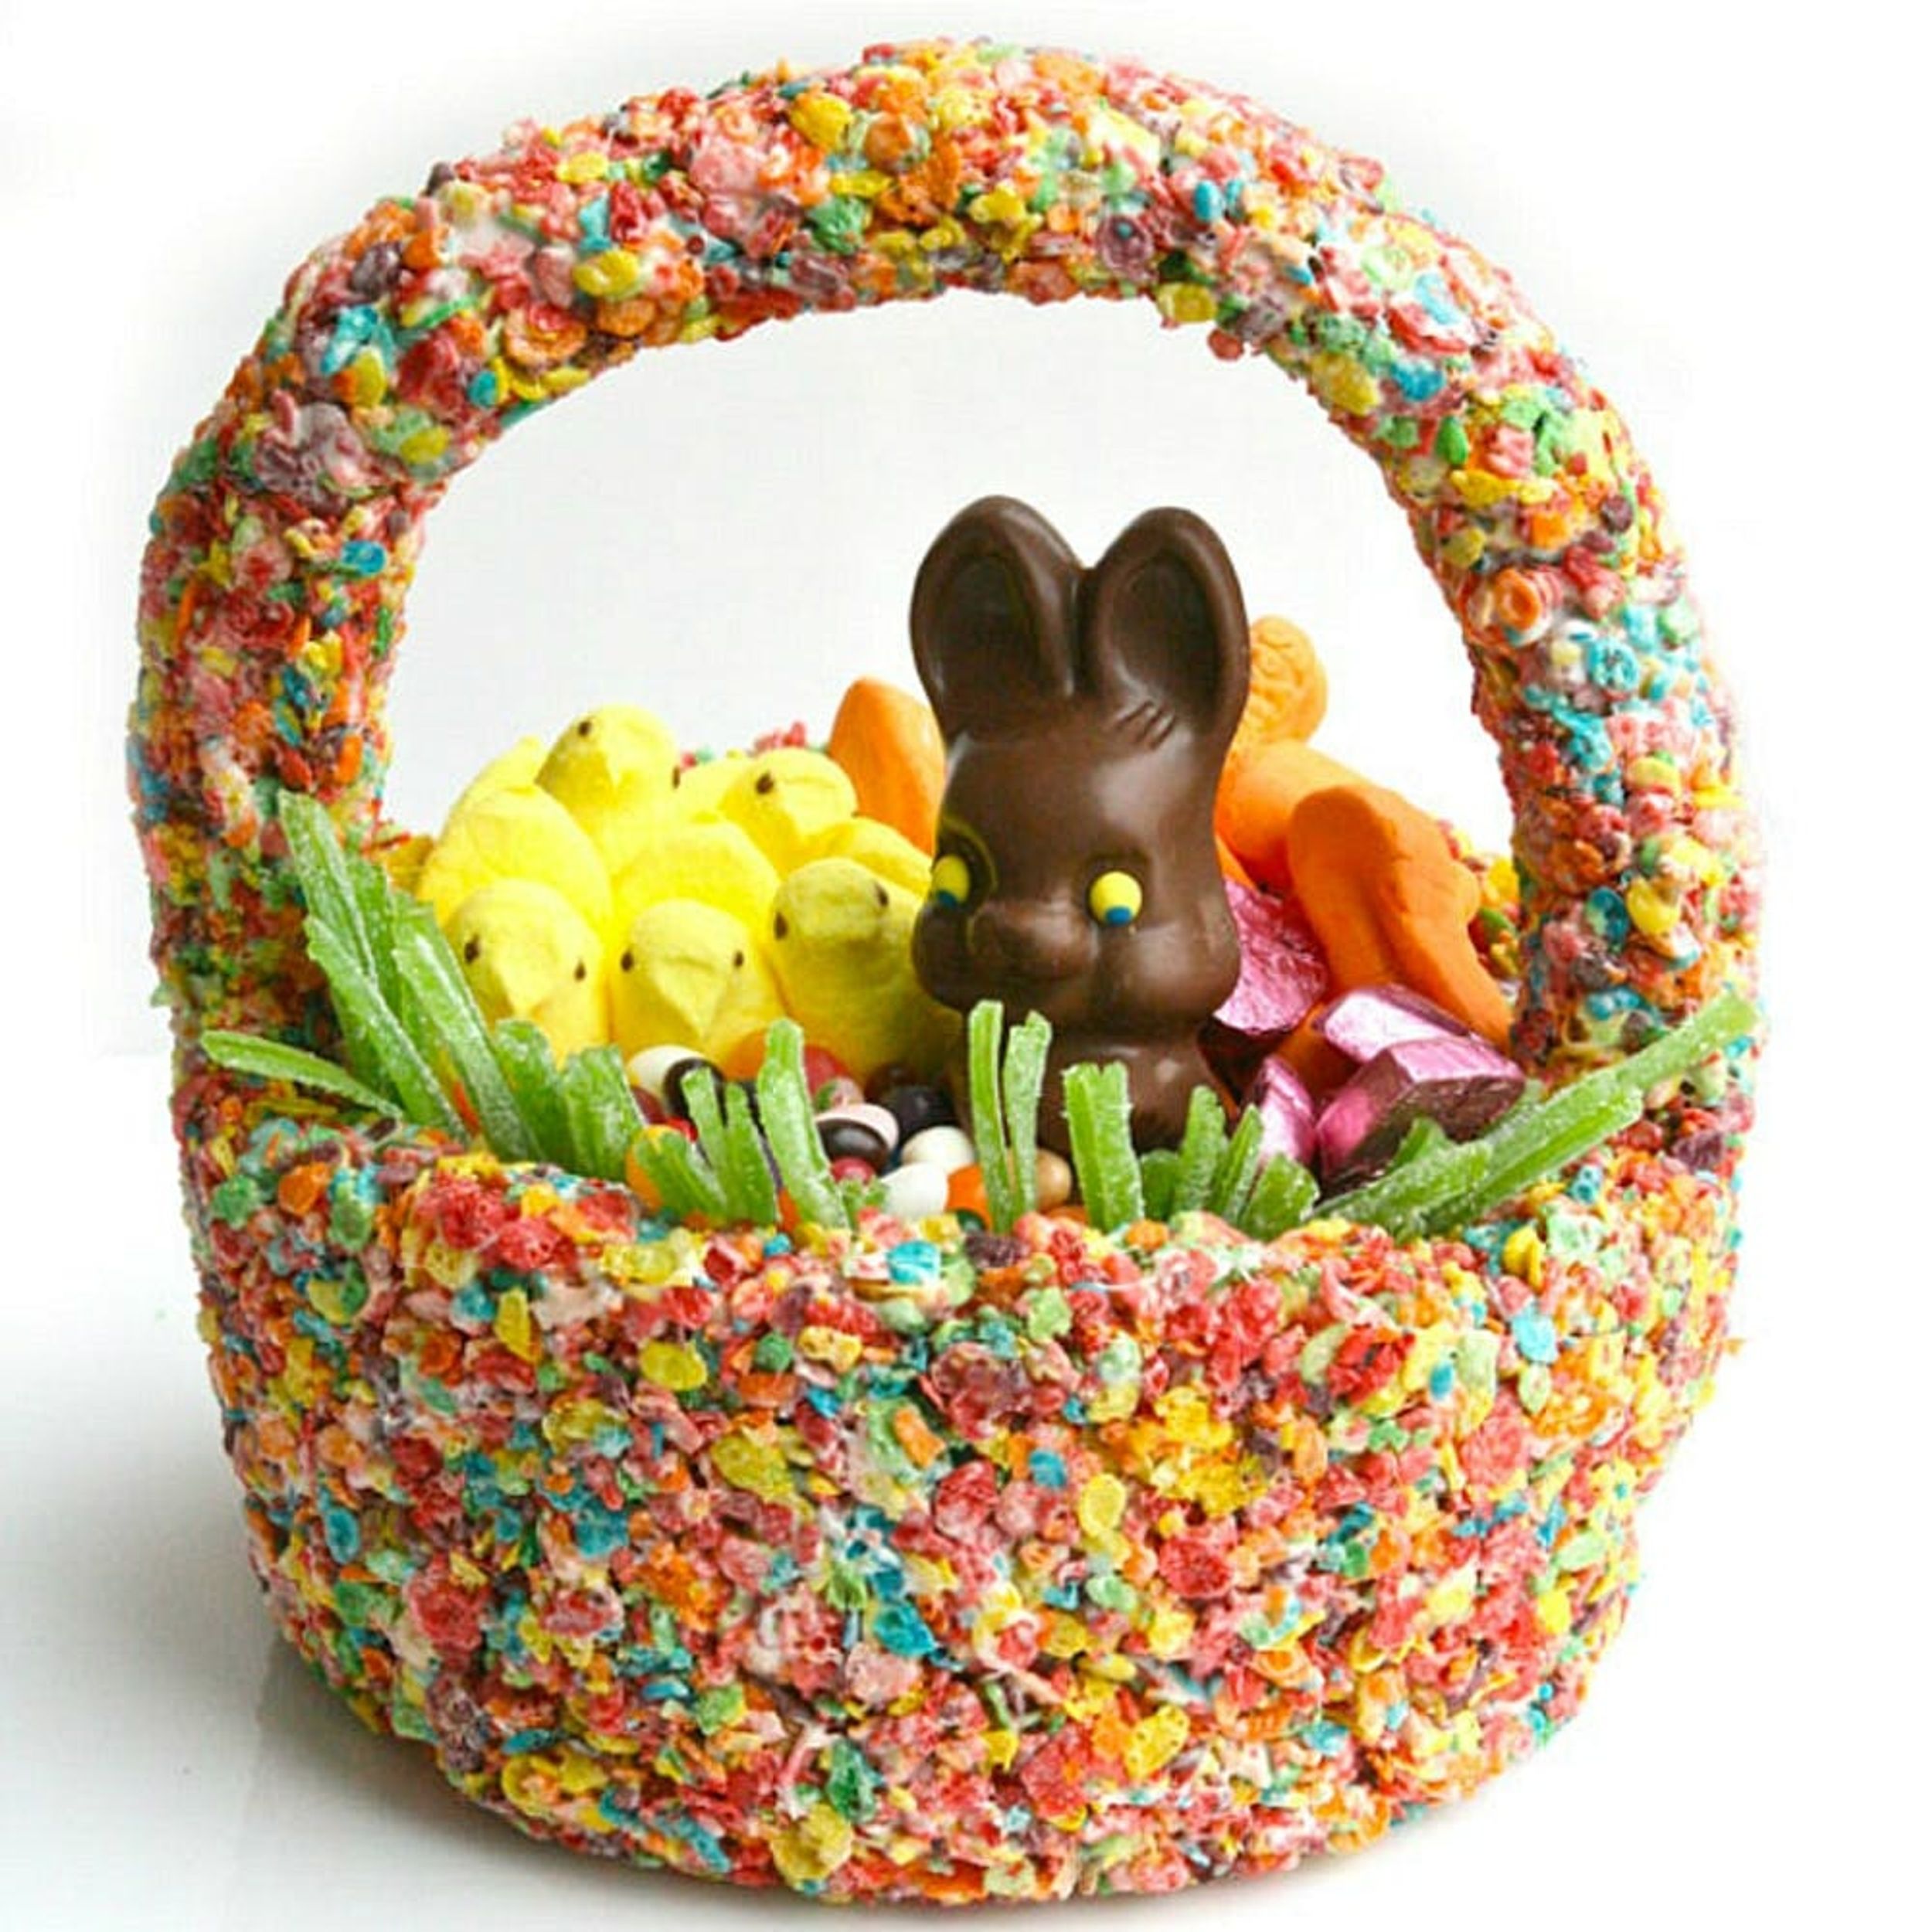 12 Edible Easter Baskets to Satisfy Your Sweet Tooth